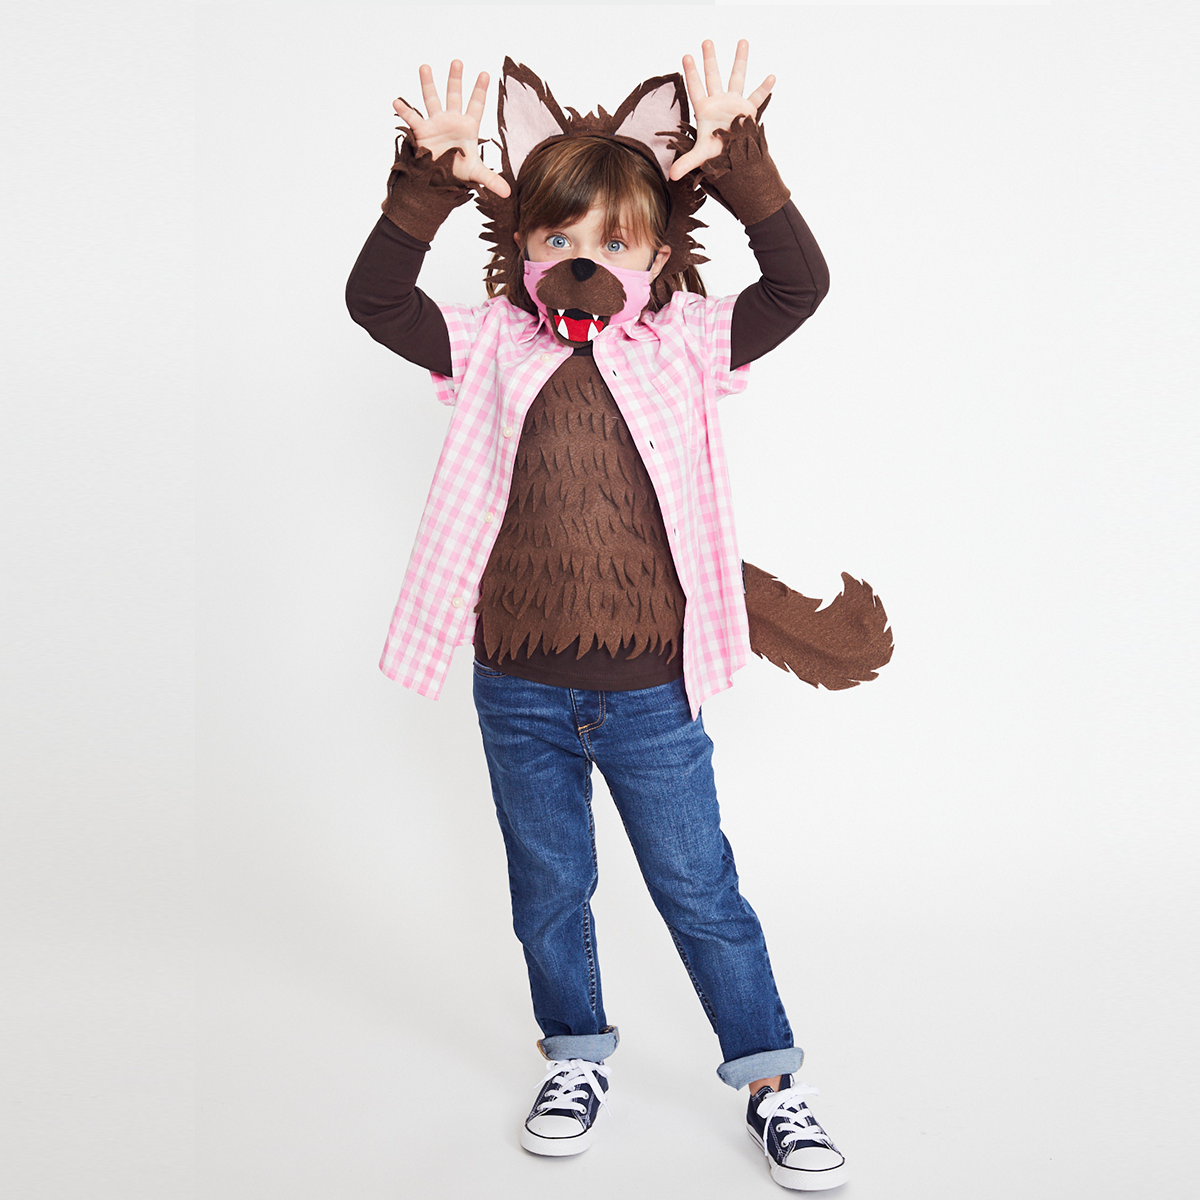 child wear pink gingham shirt over brown werewolf costume with a face mask